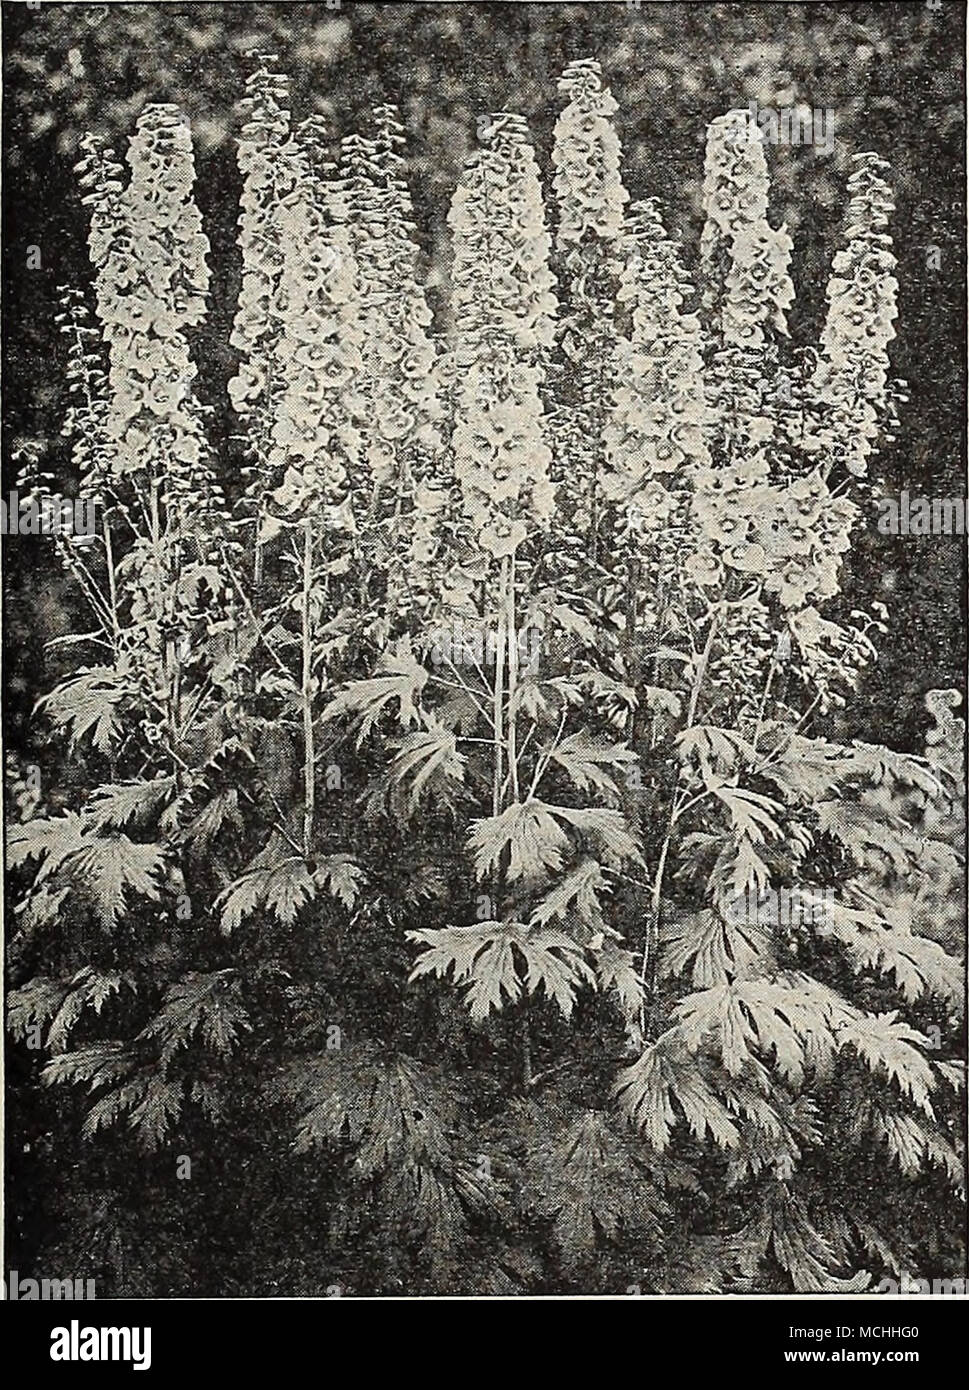 . Dreer's De Luxe Delphiniums Dreer'sDe Luxe Hybrids. Produced from the world's choicest named varieties, secured without regard to cost from the most noted European and American specialists. The results obtained were really marvelous; the plants of strong, vigorous habit with large spikes of enormous flowers in every shade of blue from the palest lavender to the richest oxford-blue as well as a number of pastel or art shades. Fully one- third were double-flowering and mostly with white centre or eye, but with a fair percentage having the dark or bee centre. A really wonderful strain that is s Stock Photo